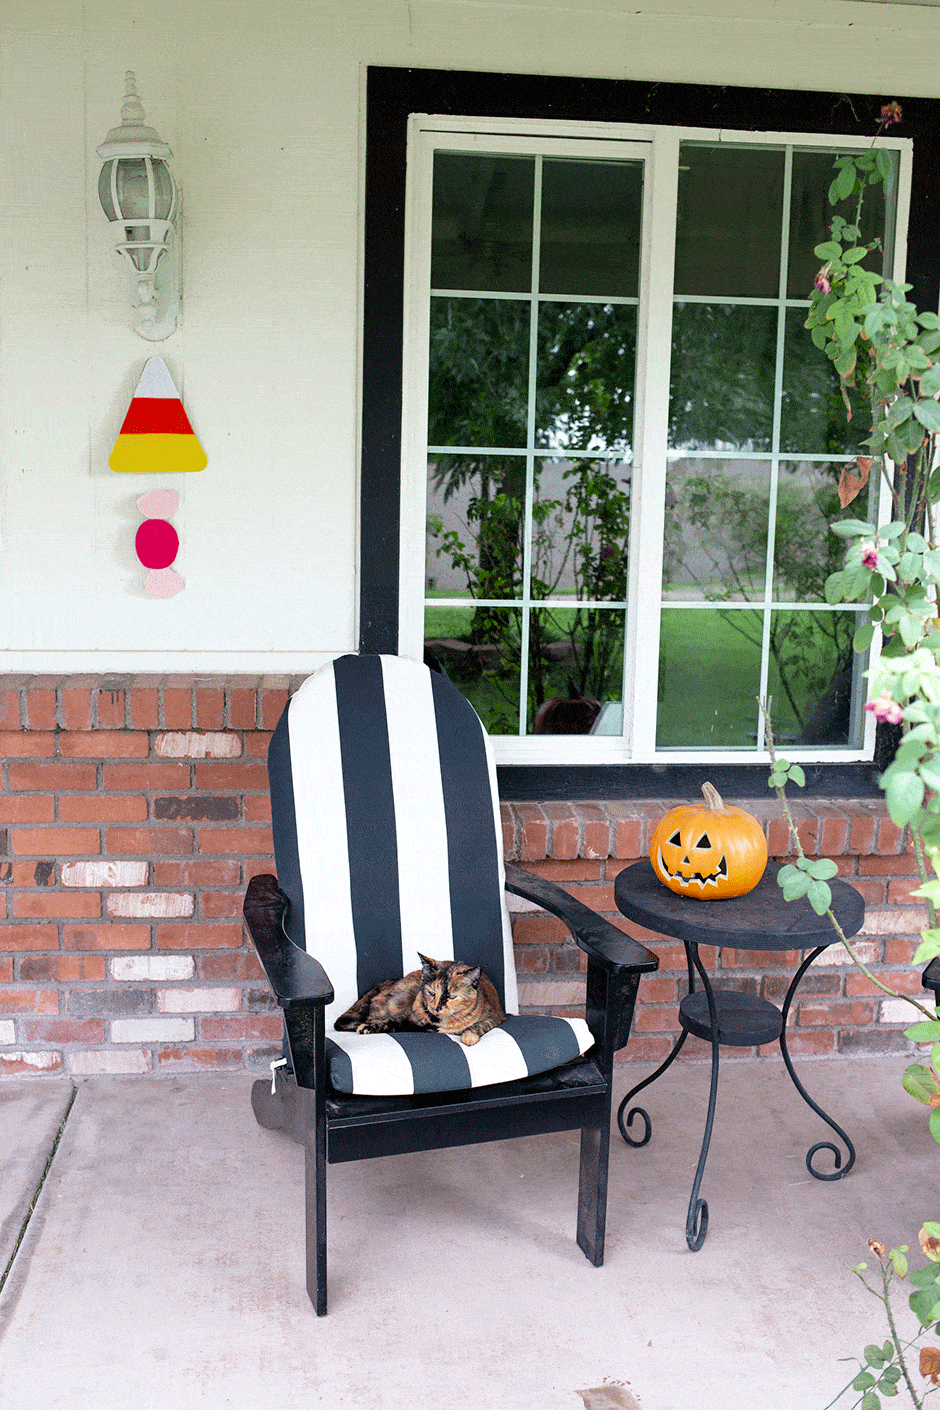 Need some Cricut Halloween ideas? This adorable, festive porchscape is sure to please your kids and neighbors alike! It's sometimes difficult to come up with Halloween decor ideas for outside but using your Cricut Maker and a few supplies will have your front door looking spooky in no time!